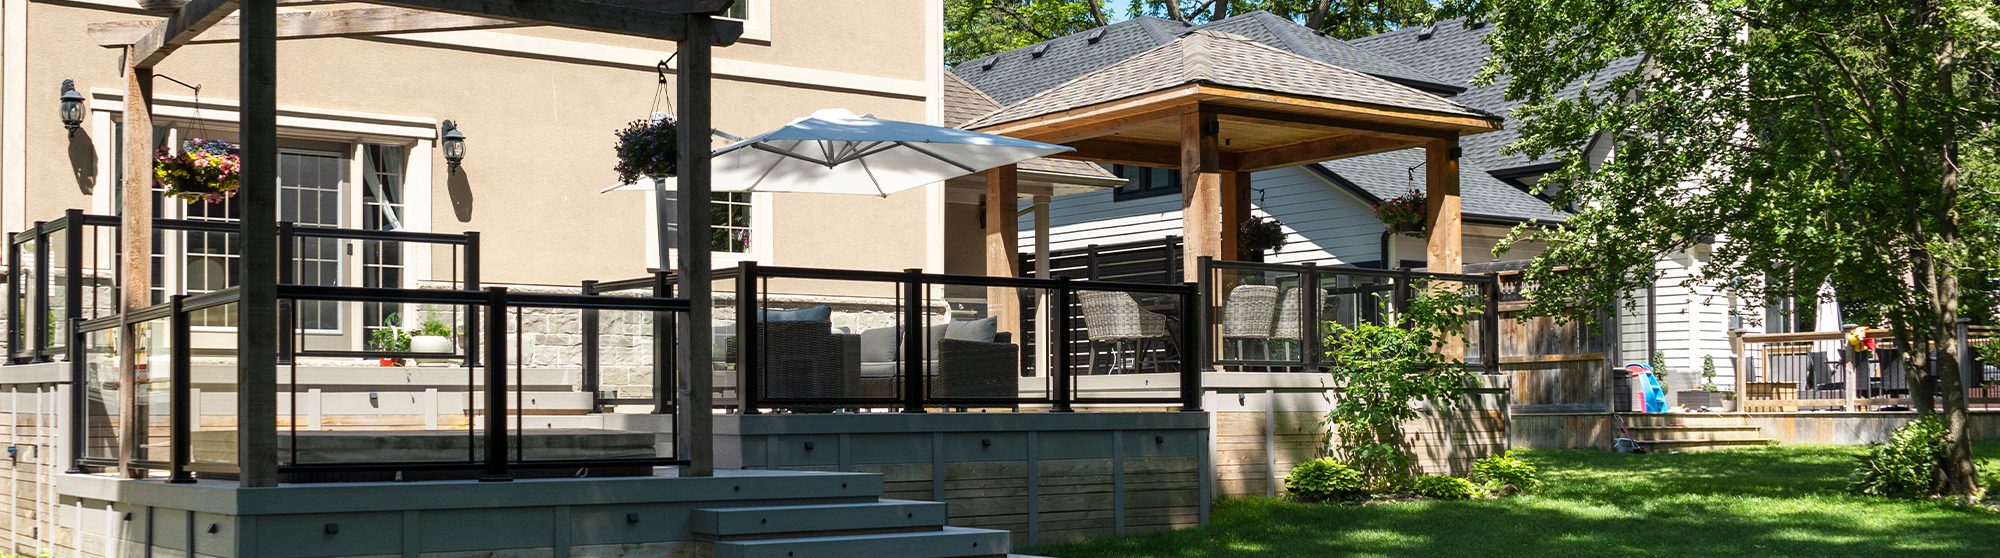 Composite deck project with a pergola, pavilion, and custom deck accessories.